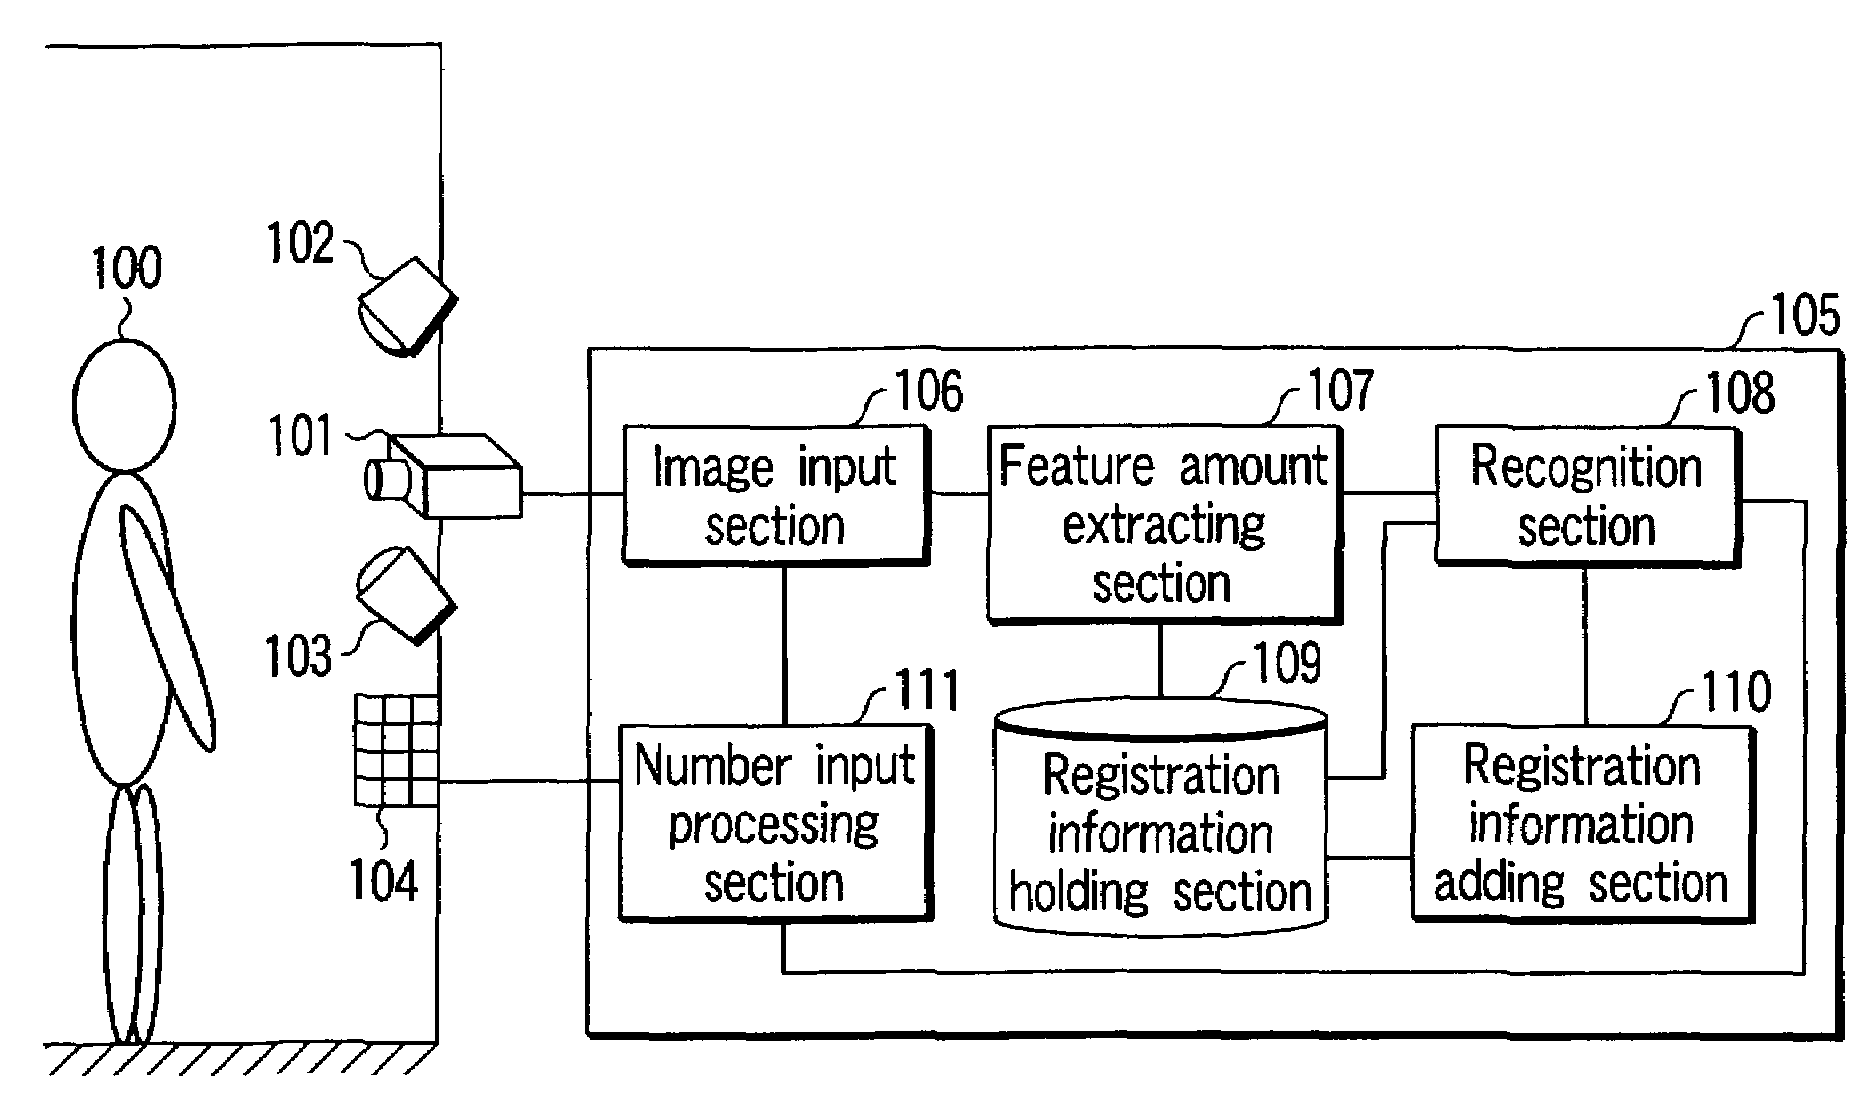 Face image recognition apparatus